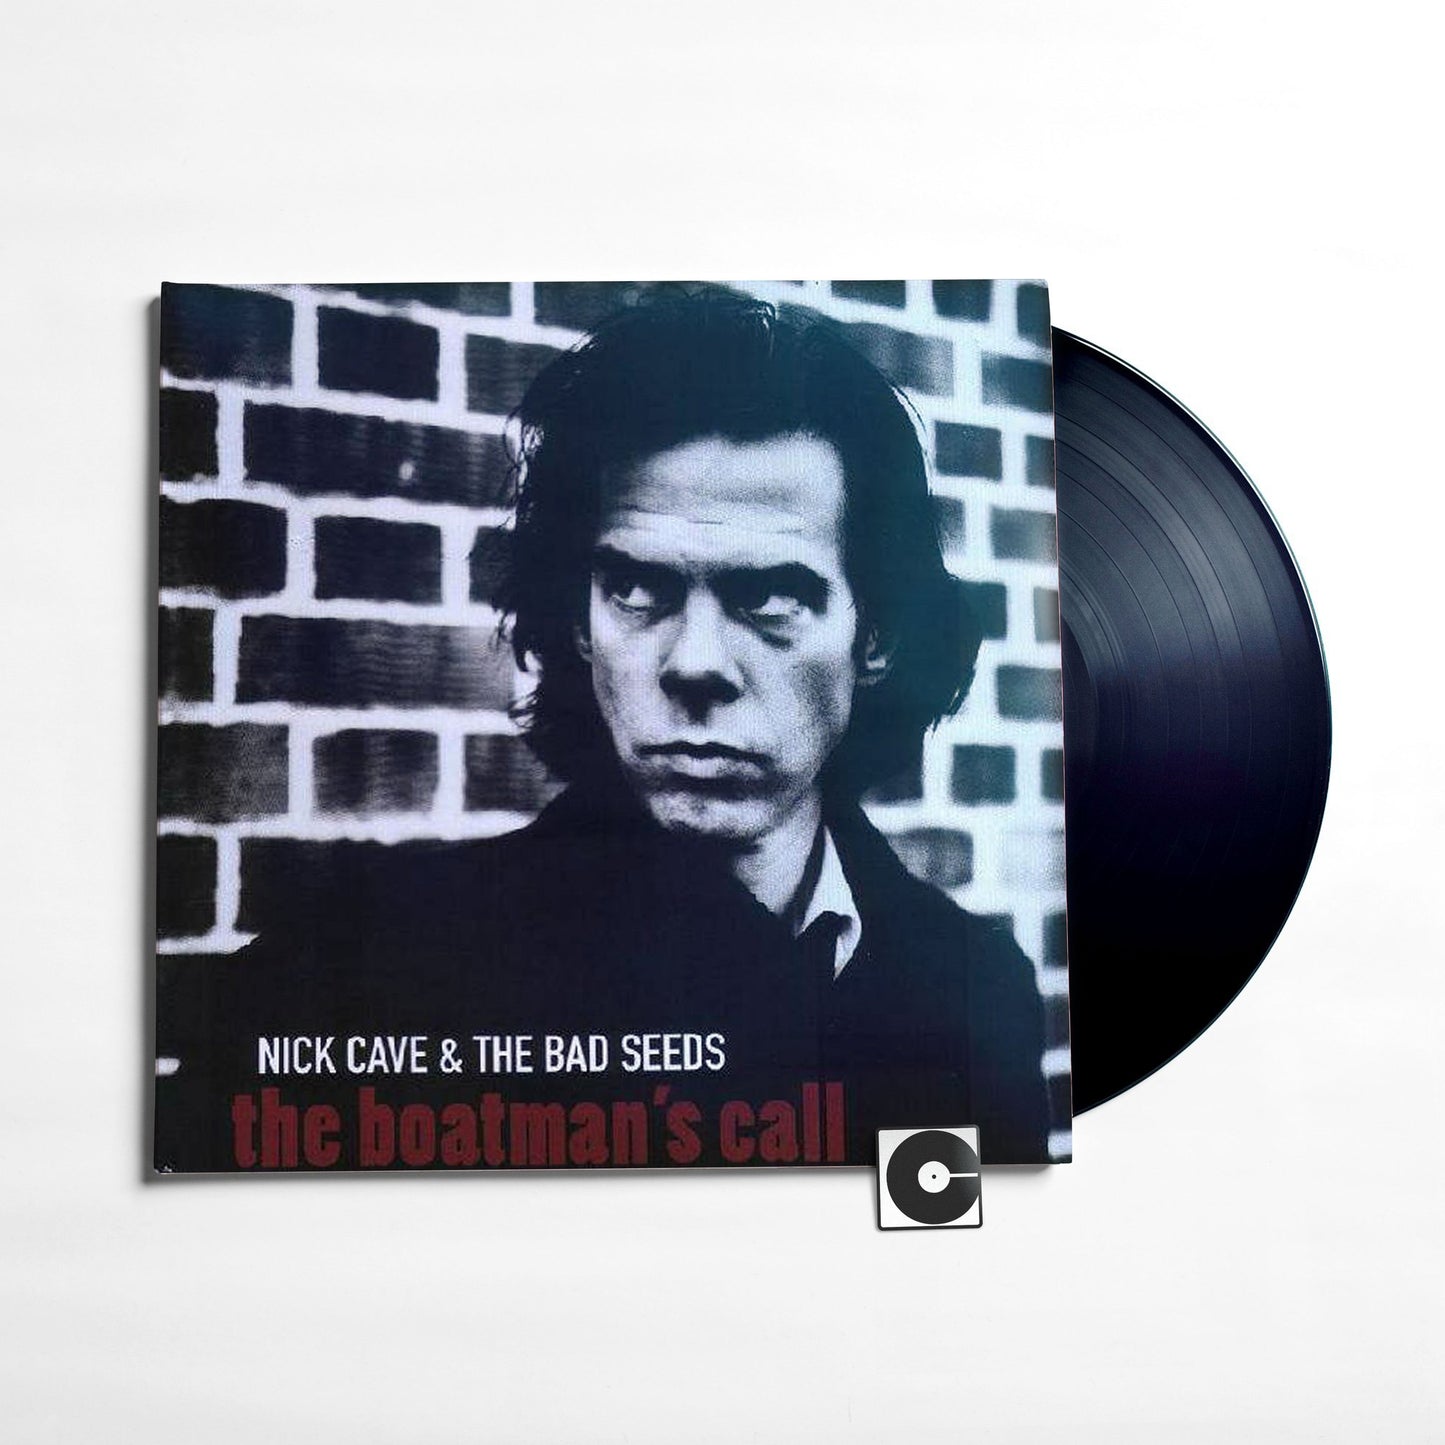 Nick Cave & The Bad Seeds - "Boatman's Call"